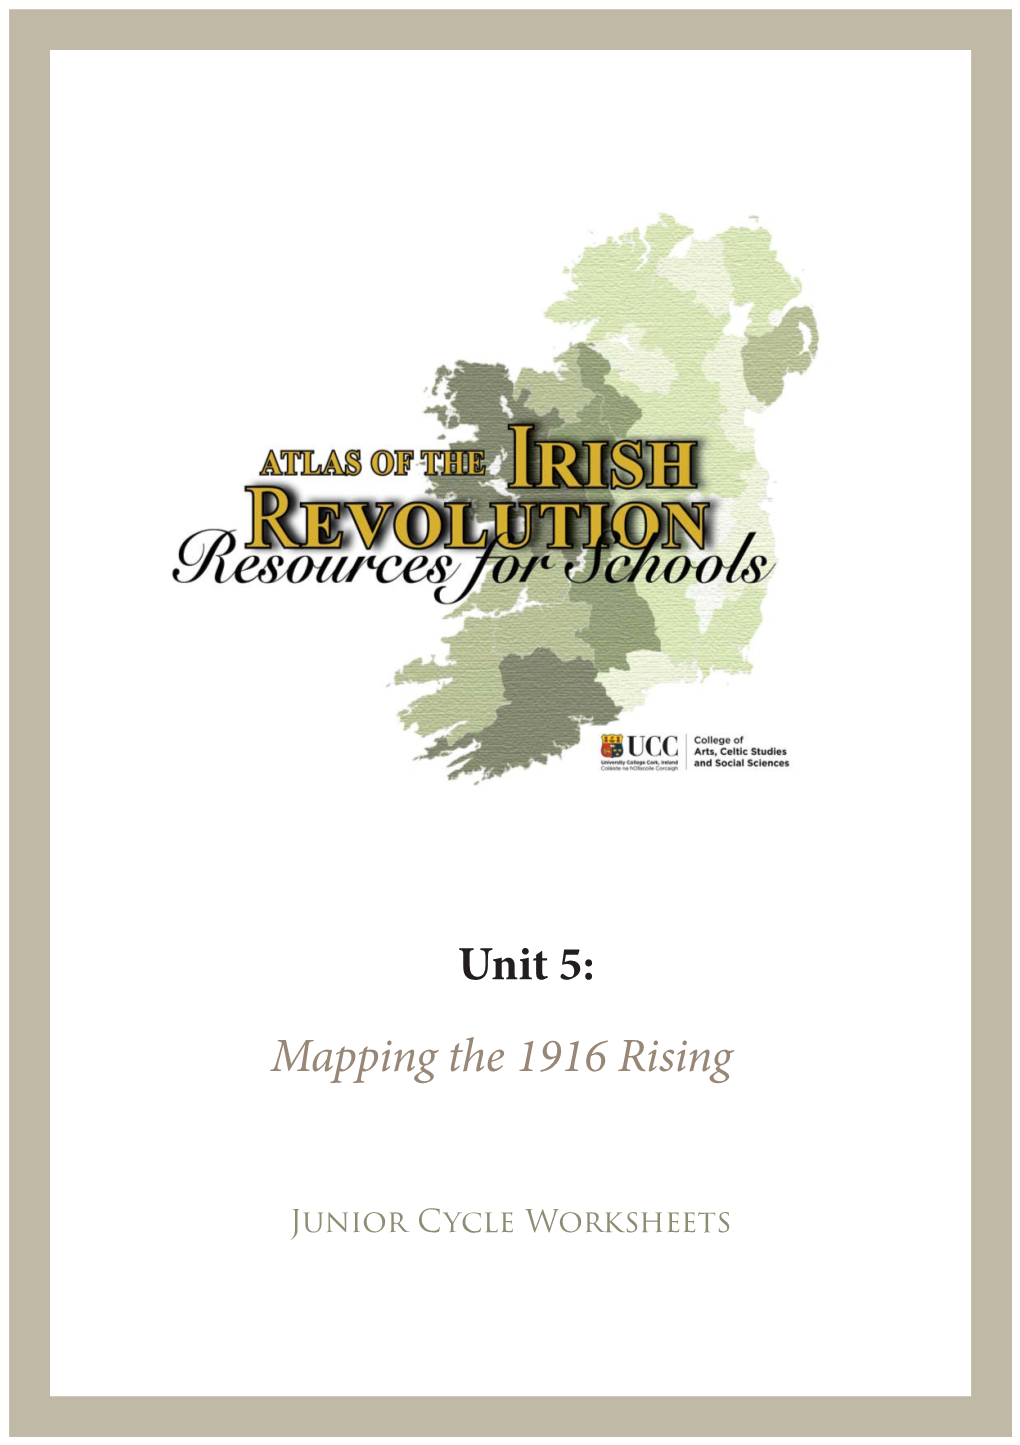 Unit 5: Mapping the 1916 Rising